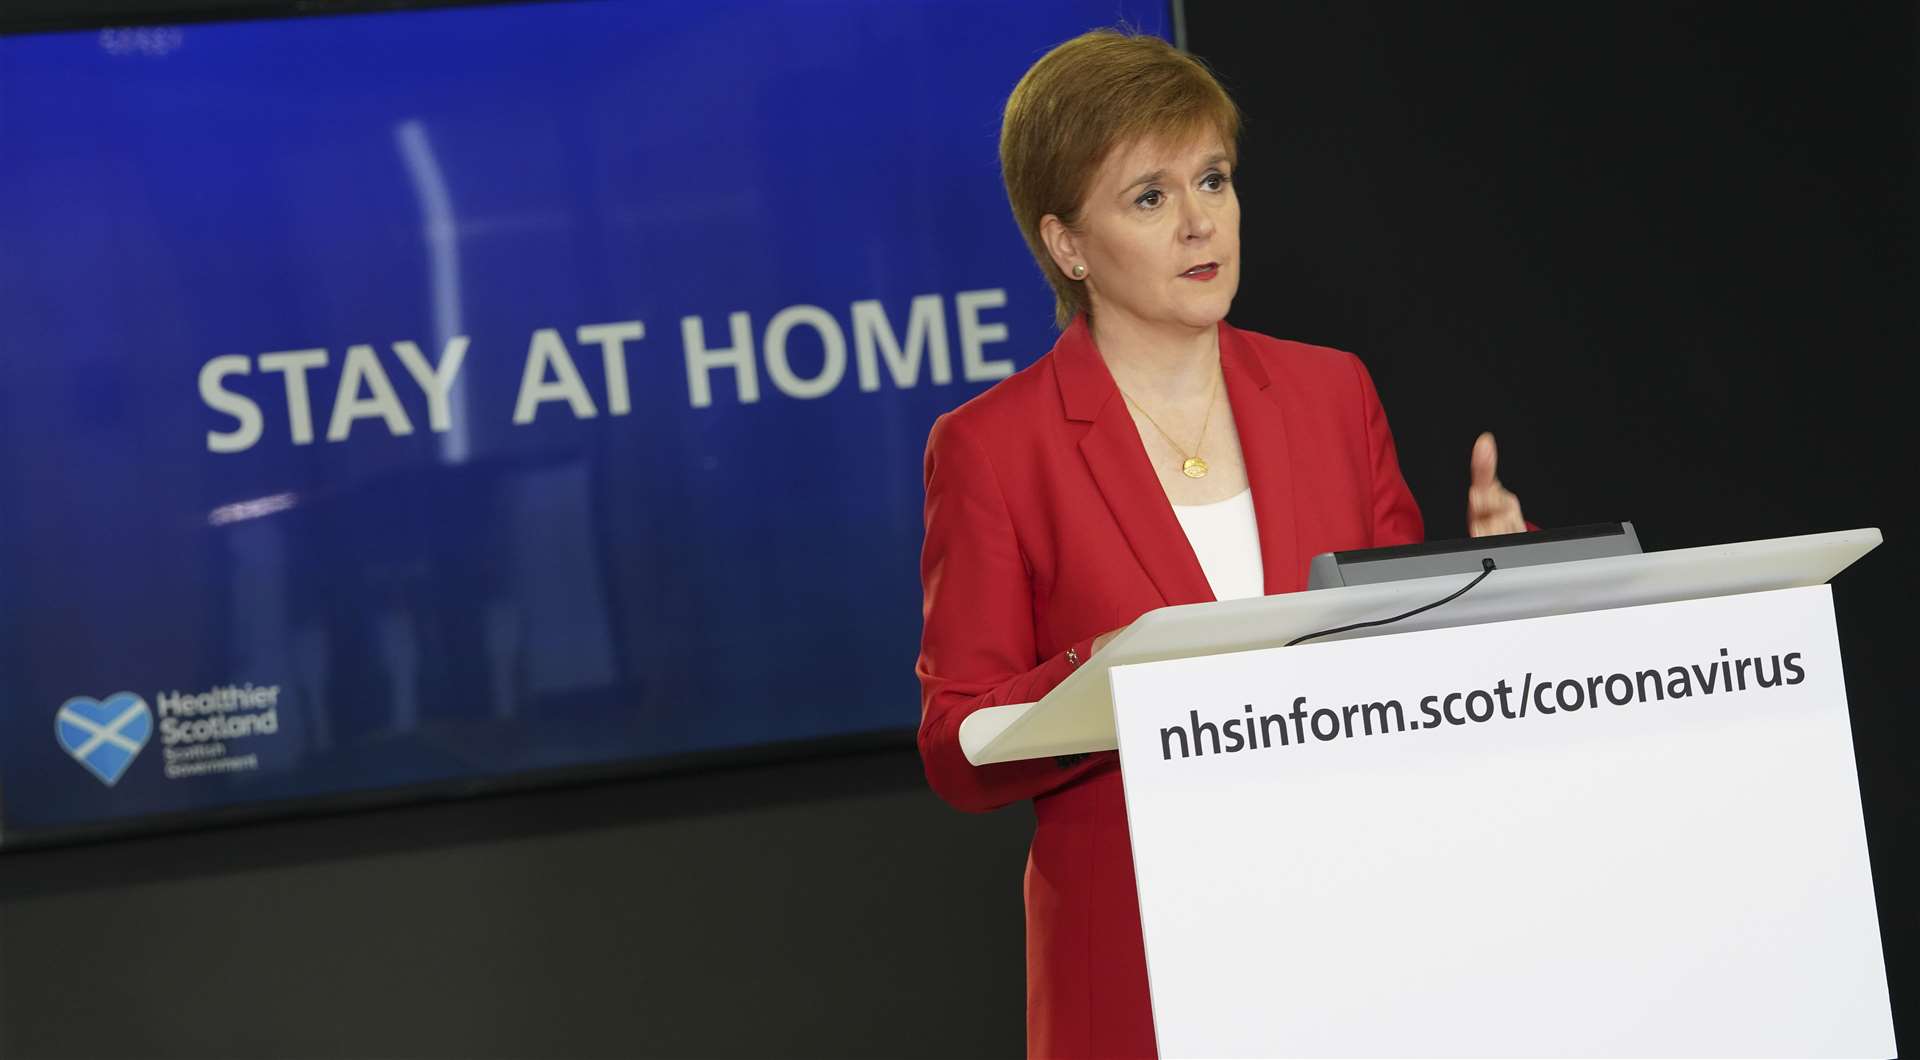 First Minister Nicola Sturgeon stuck with the ‘Stay at home’ messaging (Scottish Government/PA)